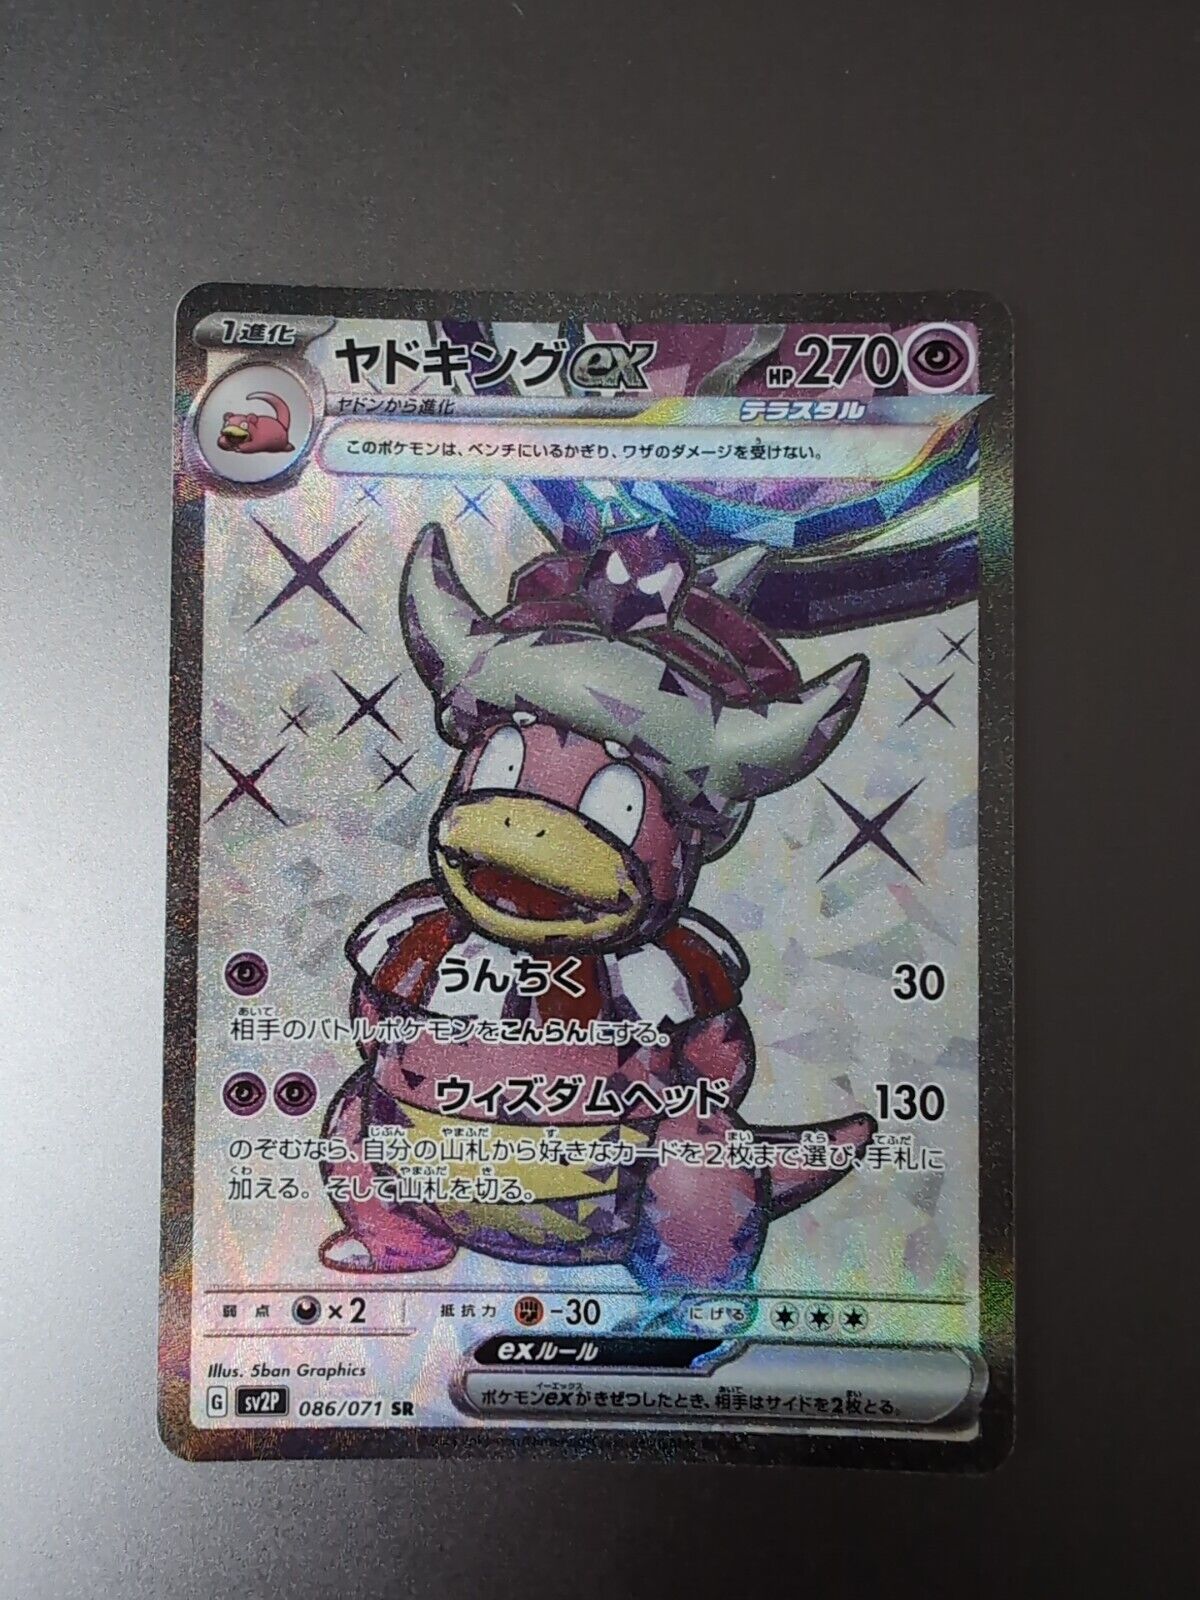 Slowking ex 086/071 SV2P Japanese Holo Pokemon Card in Excellent Condition